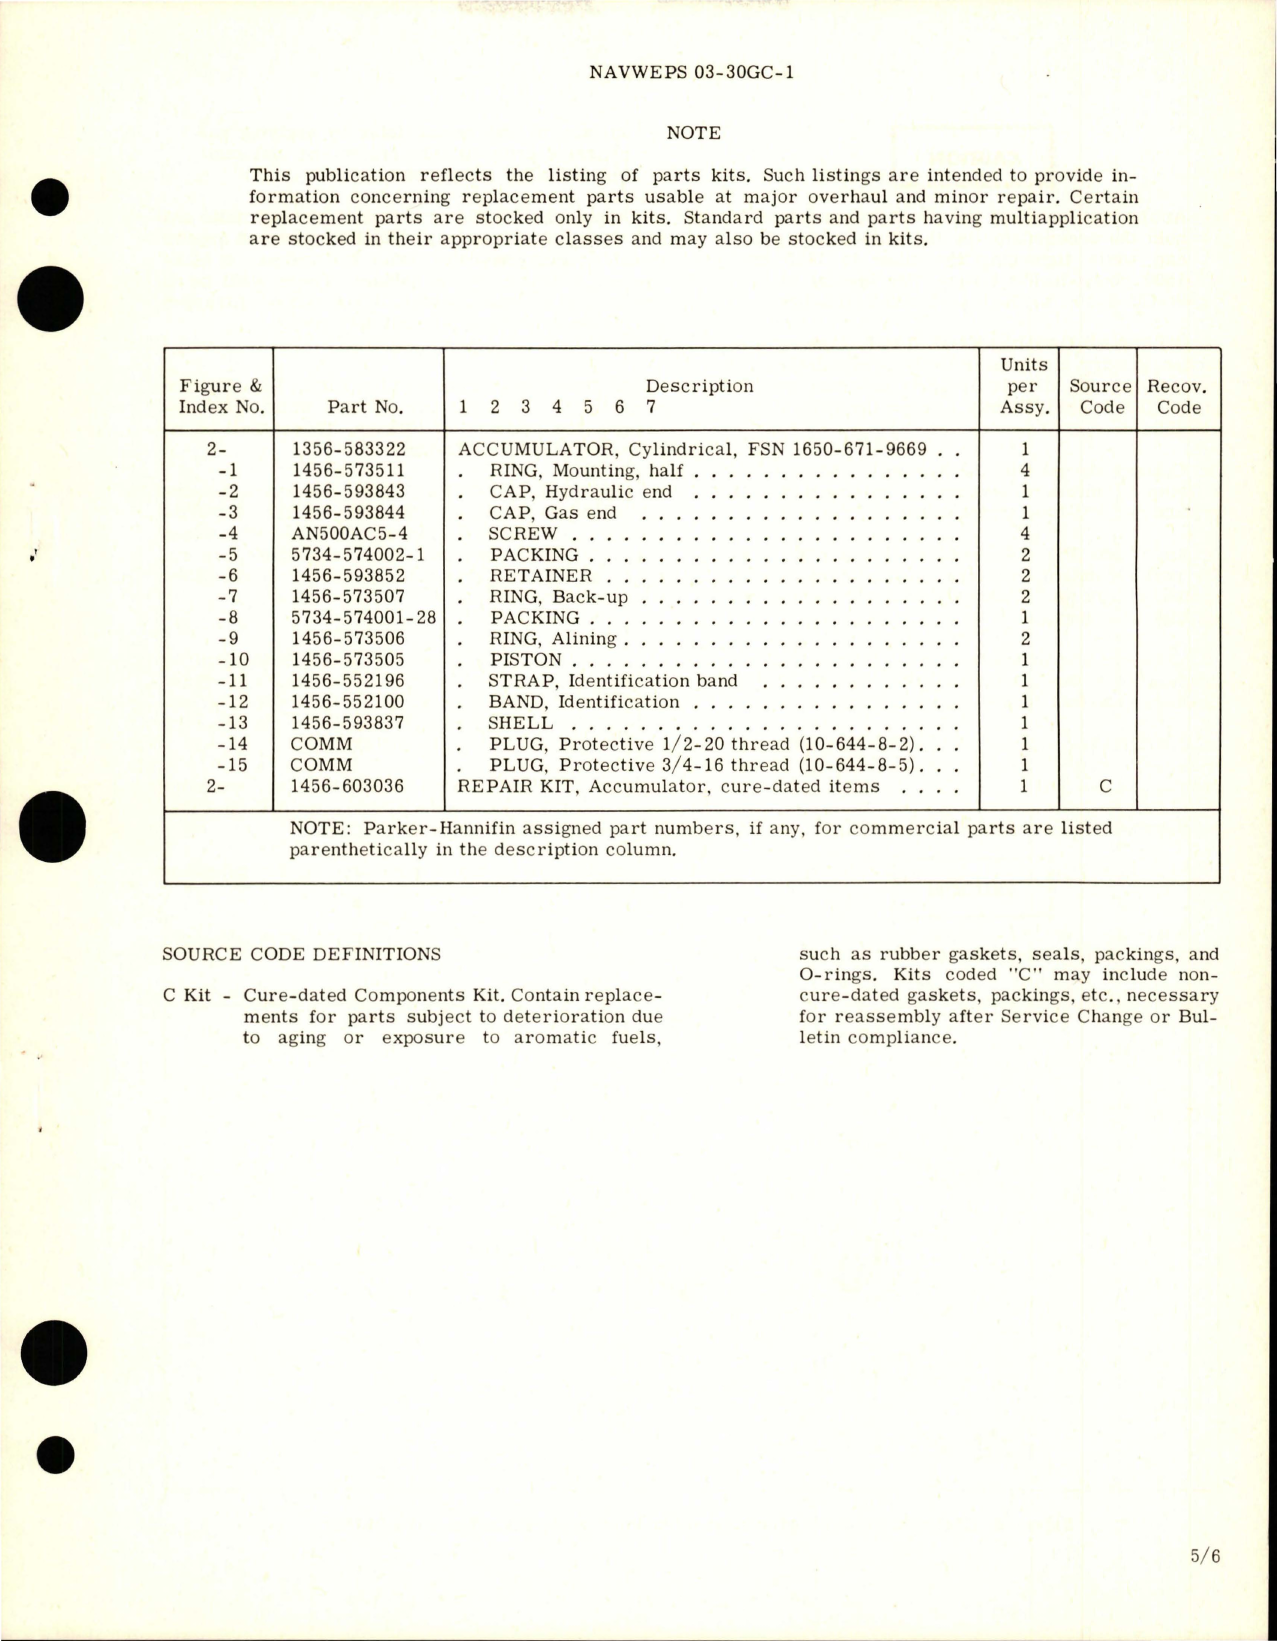 Sample page 5 from AirCorps Library document: Overhaul Instructions with Parts Breakdown for Cylindrical Accumulator - Part 1356-583322